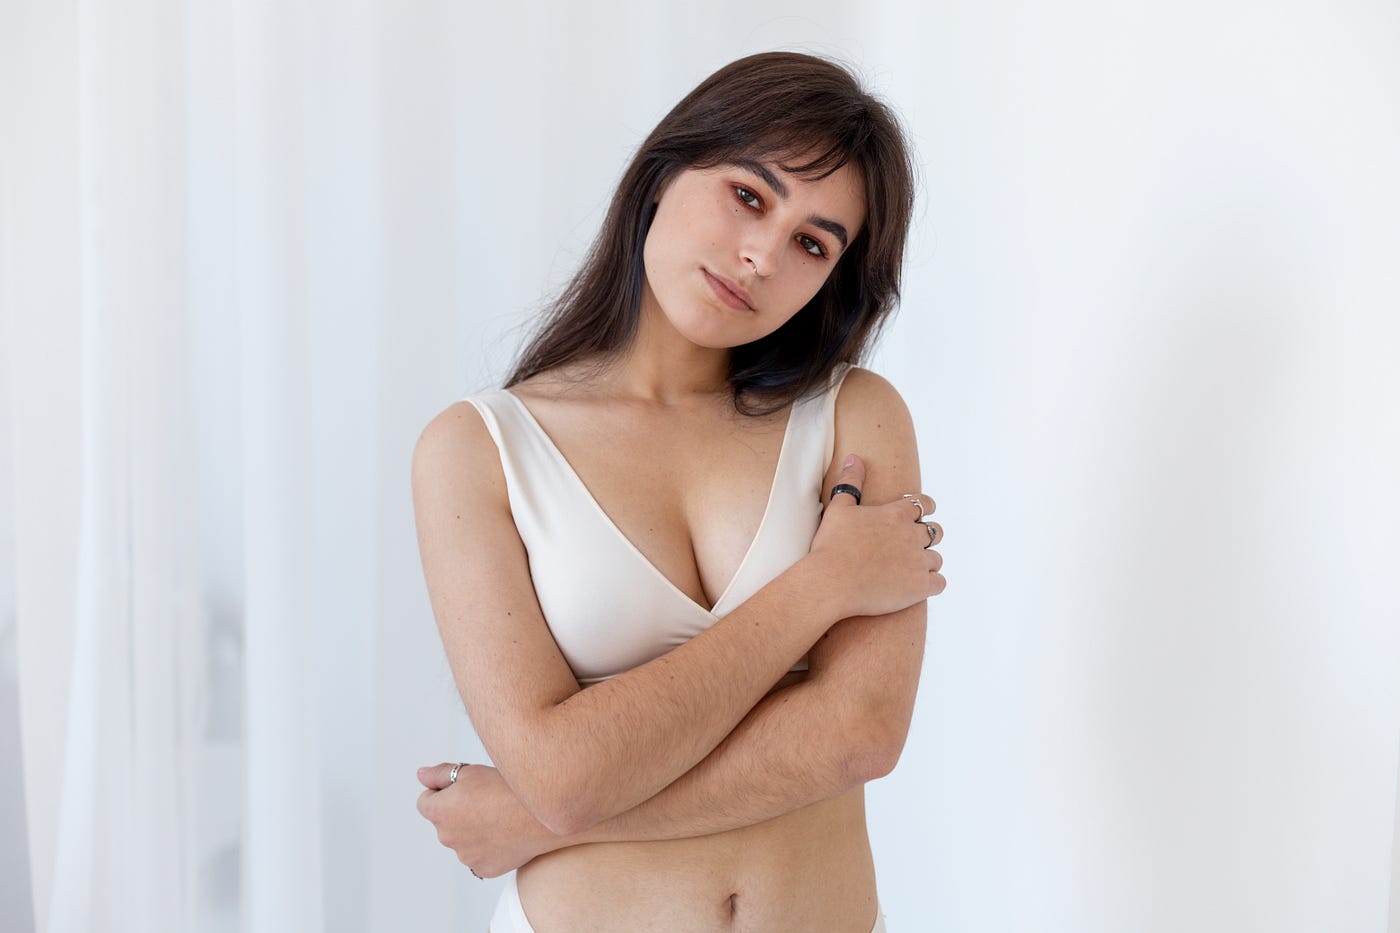 Causes and Prevention of Sagging Breasts